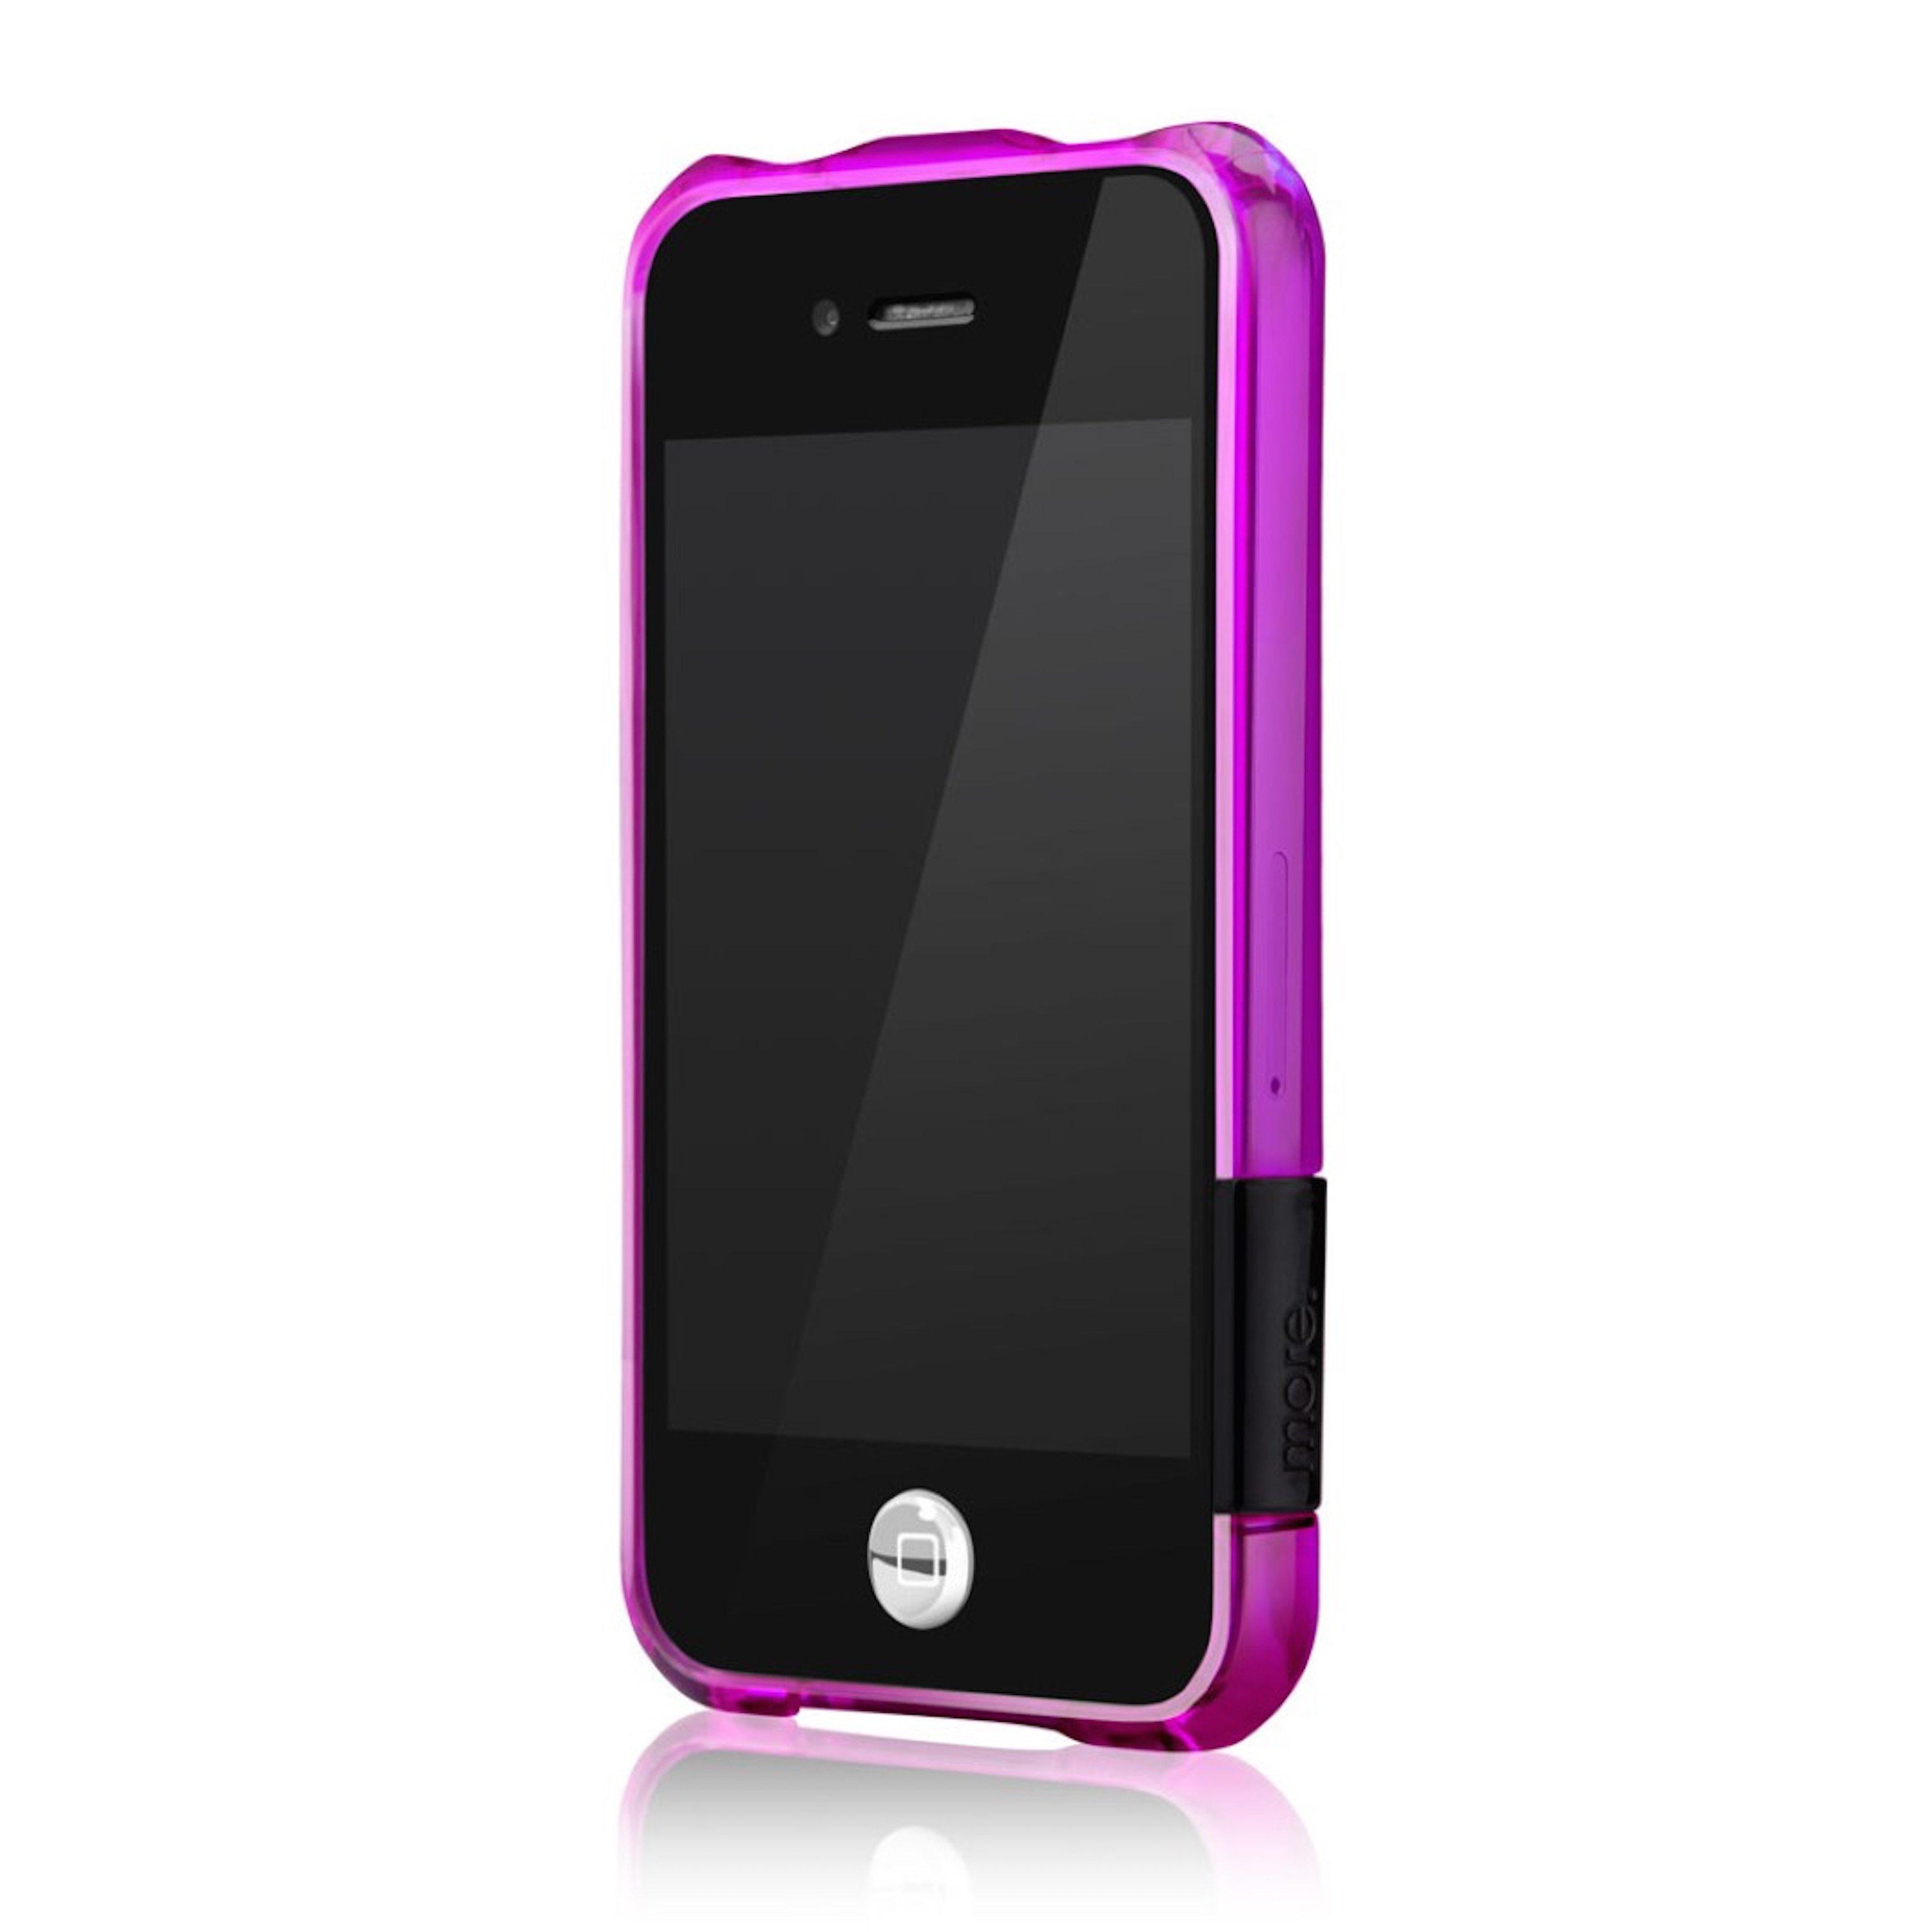 Image of more. iPhone 4 Bumper Lucent Amethsy